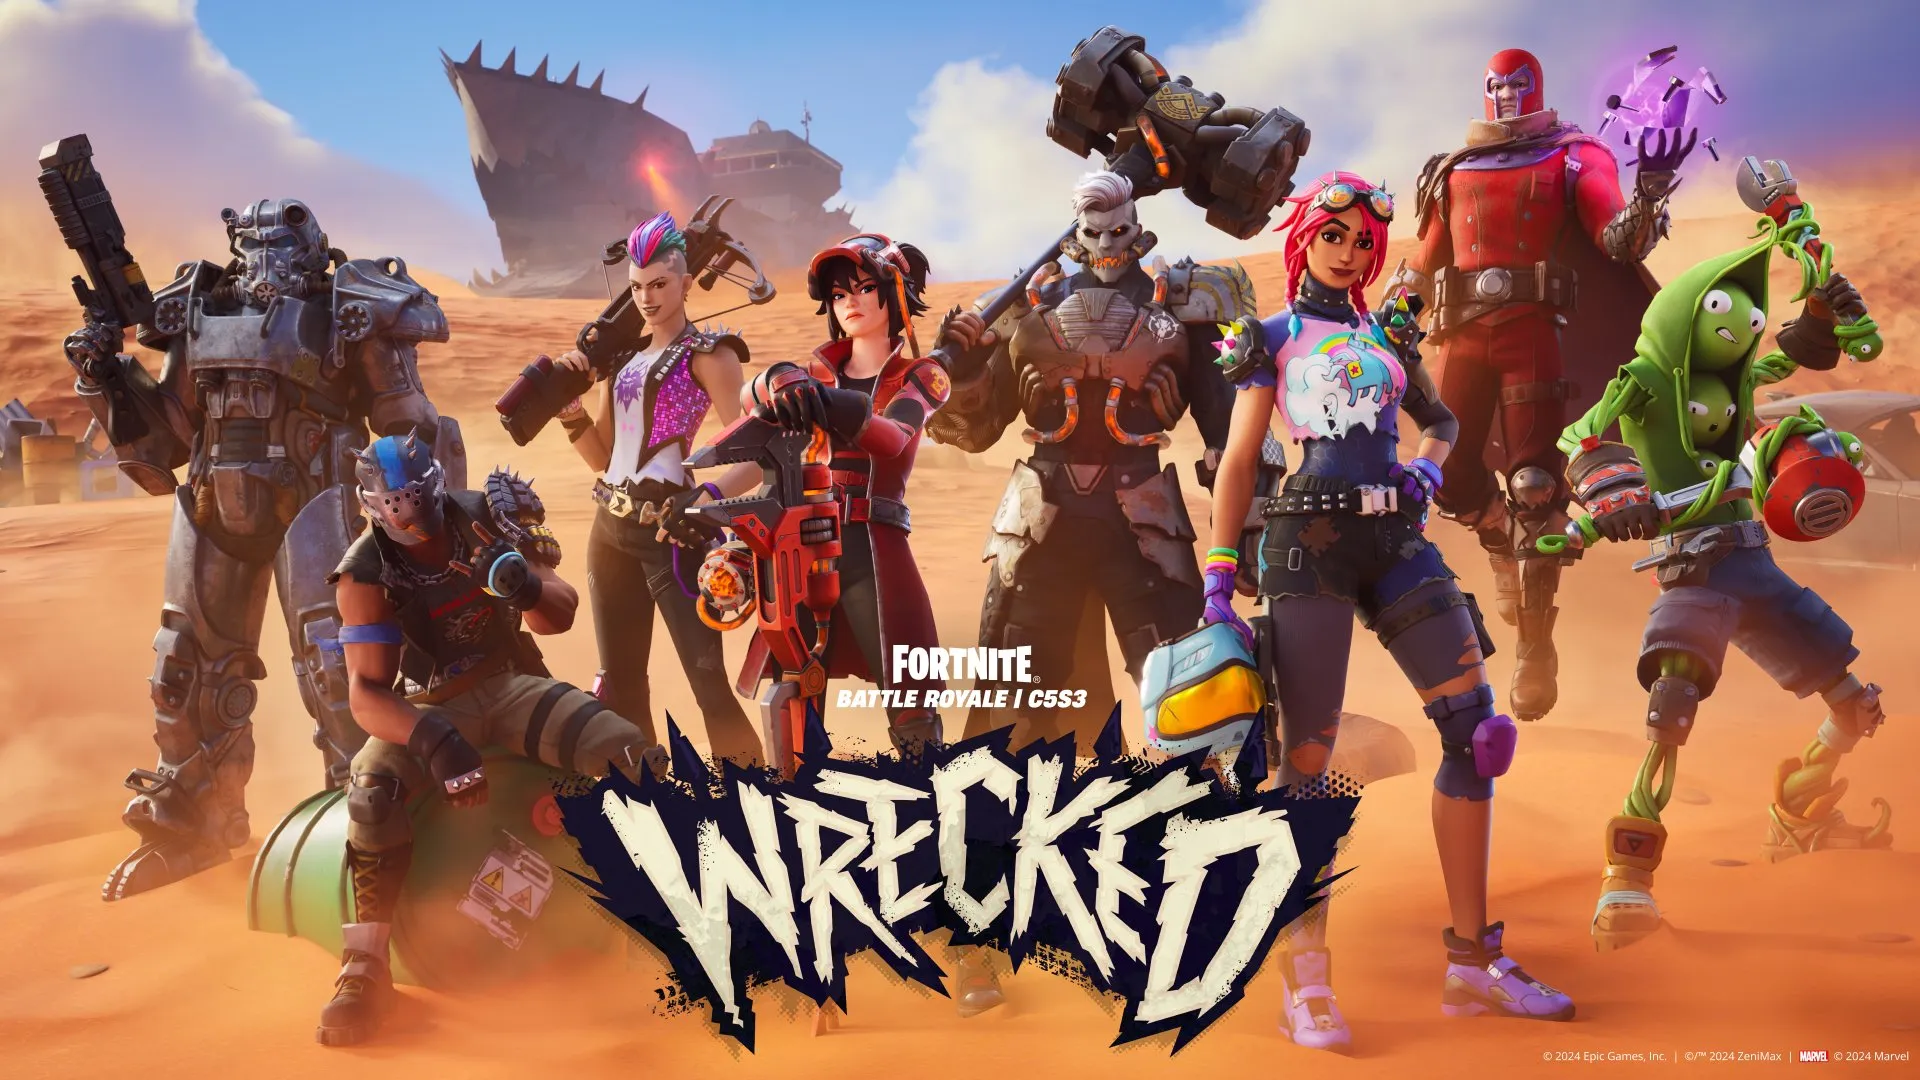 Fortnite: Wrecked. Image: Epic Games